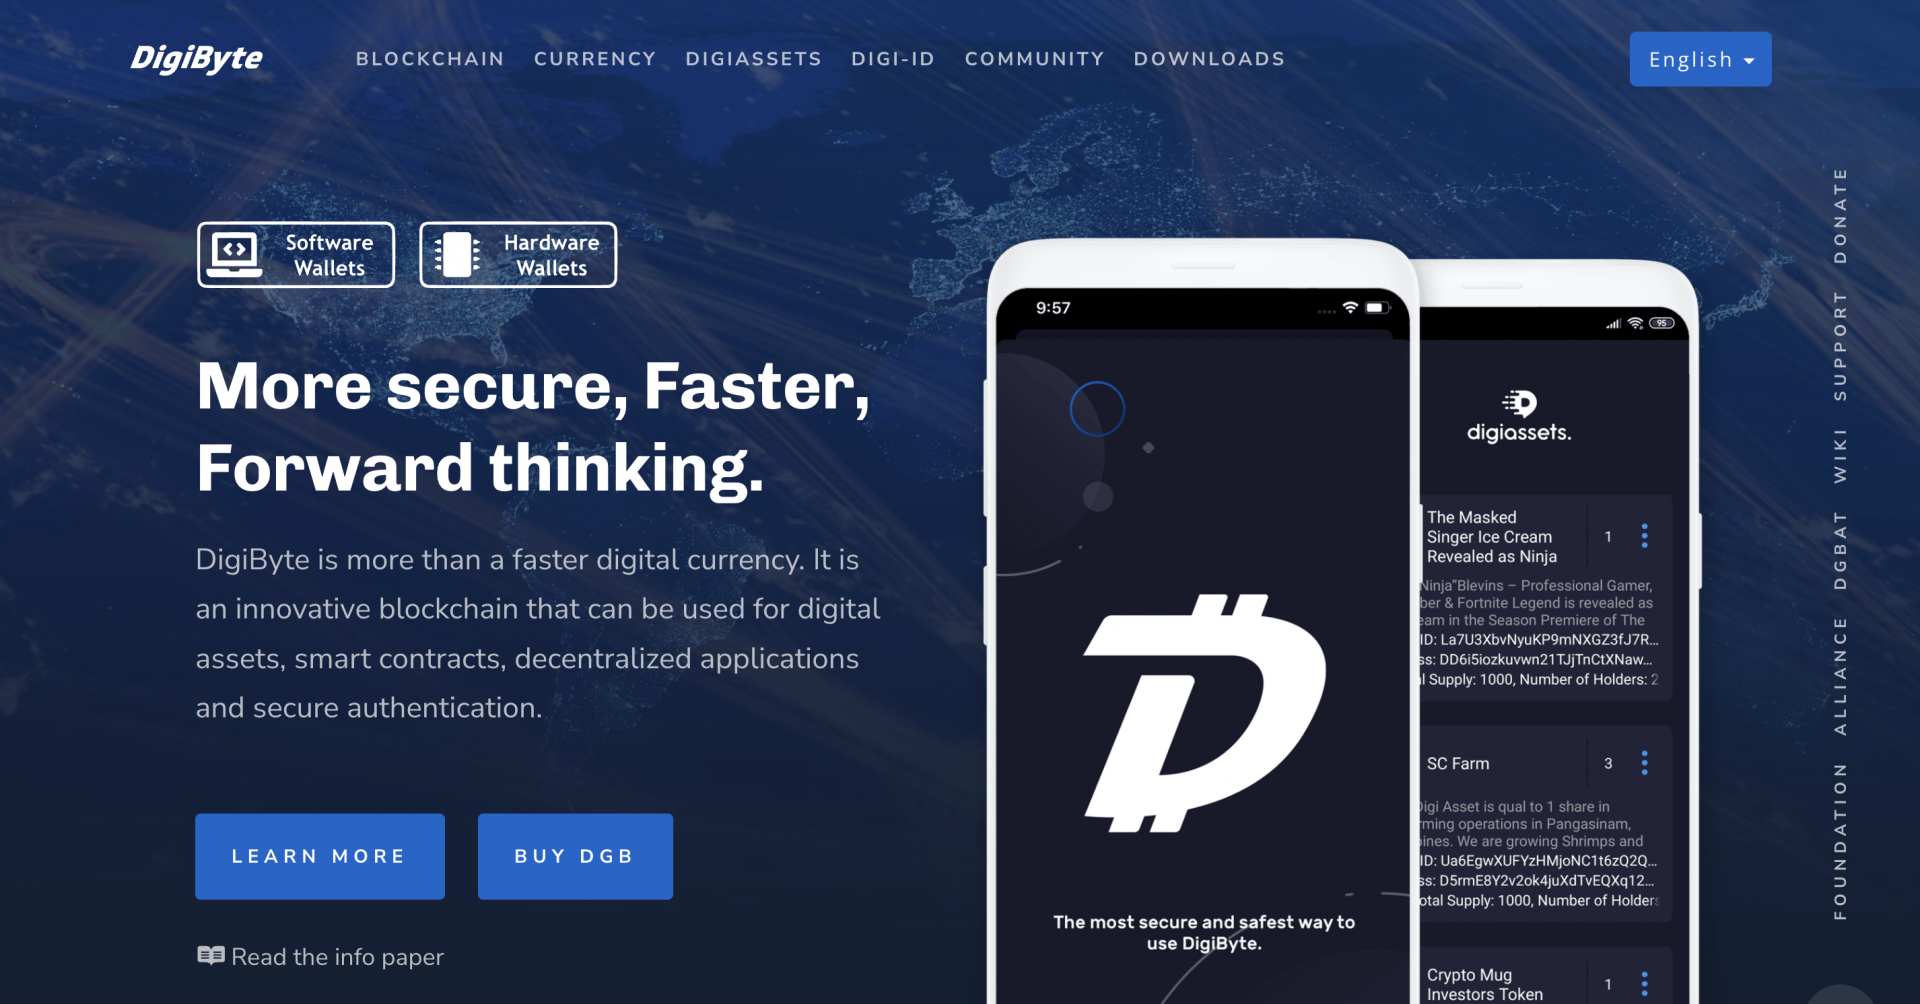 Is Digibyte a good investment? DGB Token Review - Guardarian blog